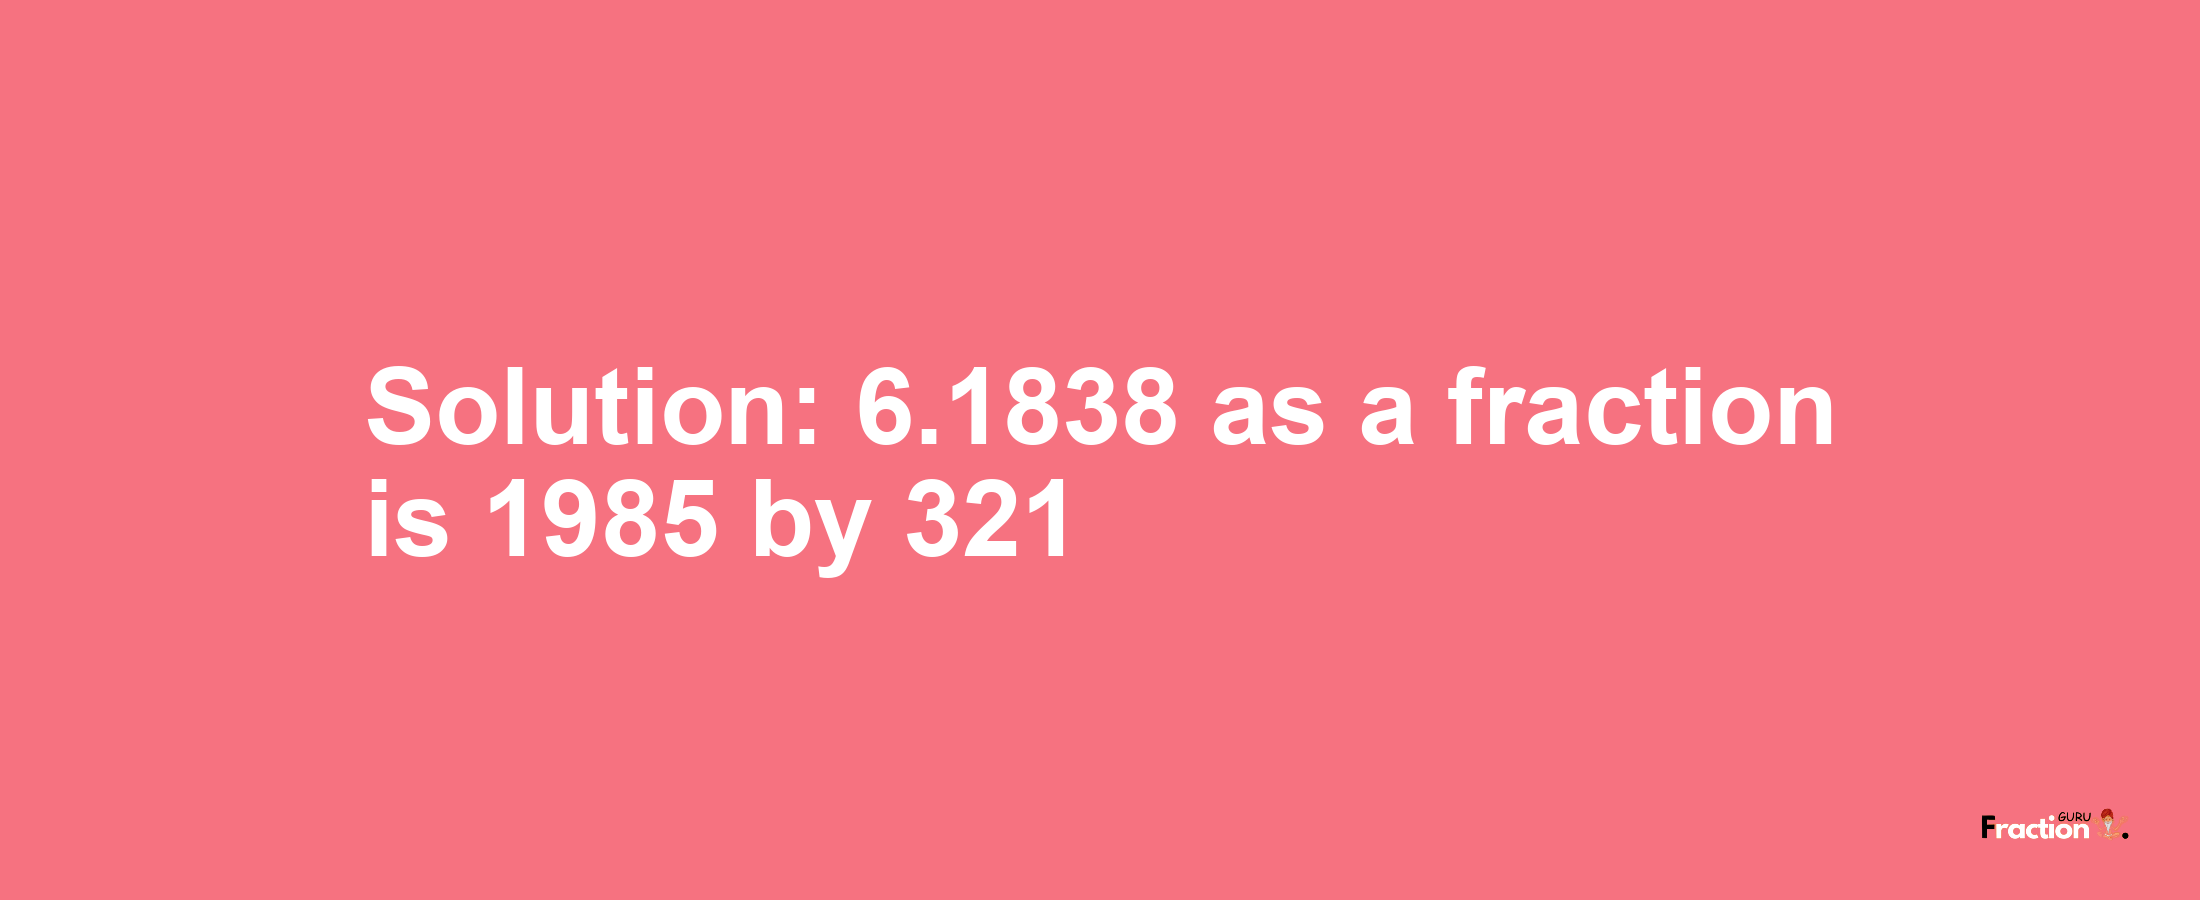 Solution:6.1838 as a fraction is 1985/321